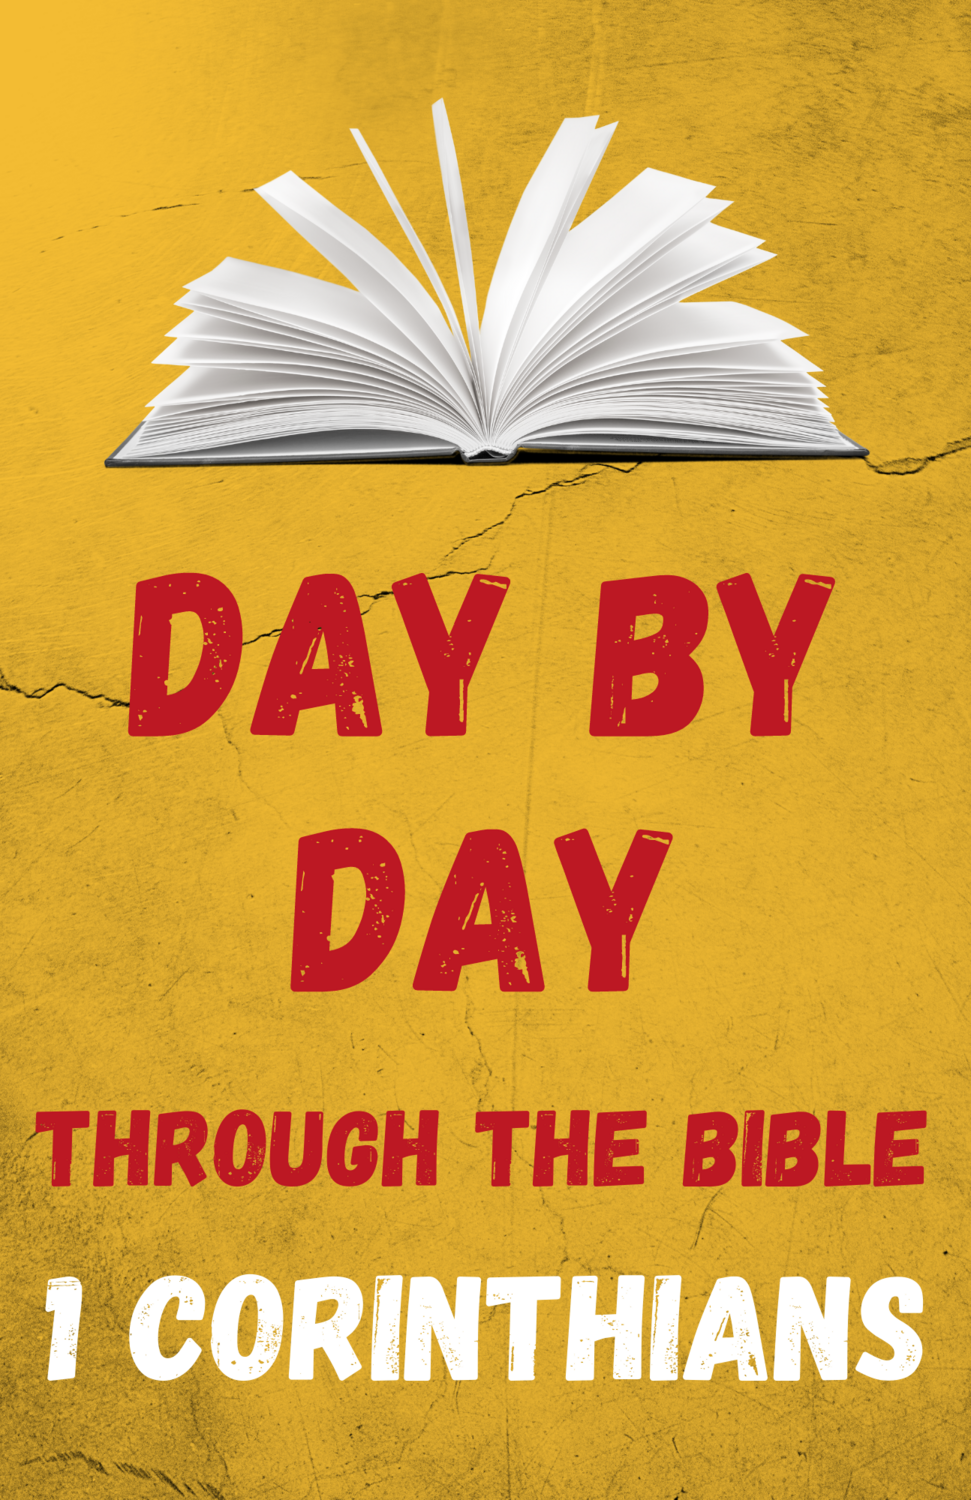 Day by Day Through the Bible: Sixteen Days in 1 Corinthians - Digital Download